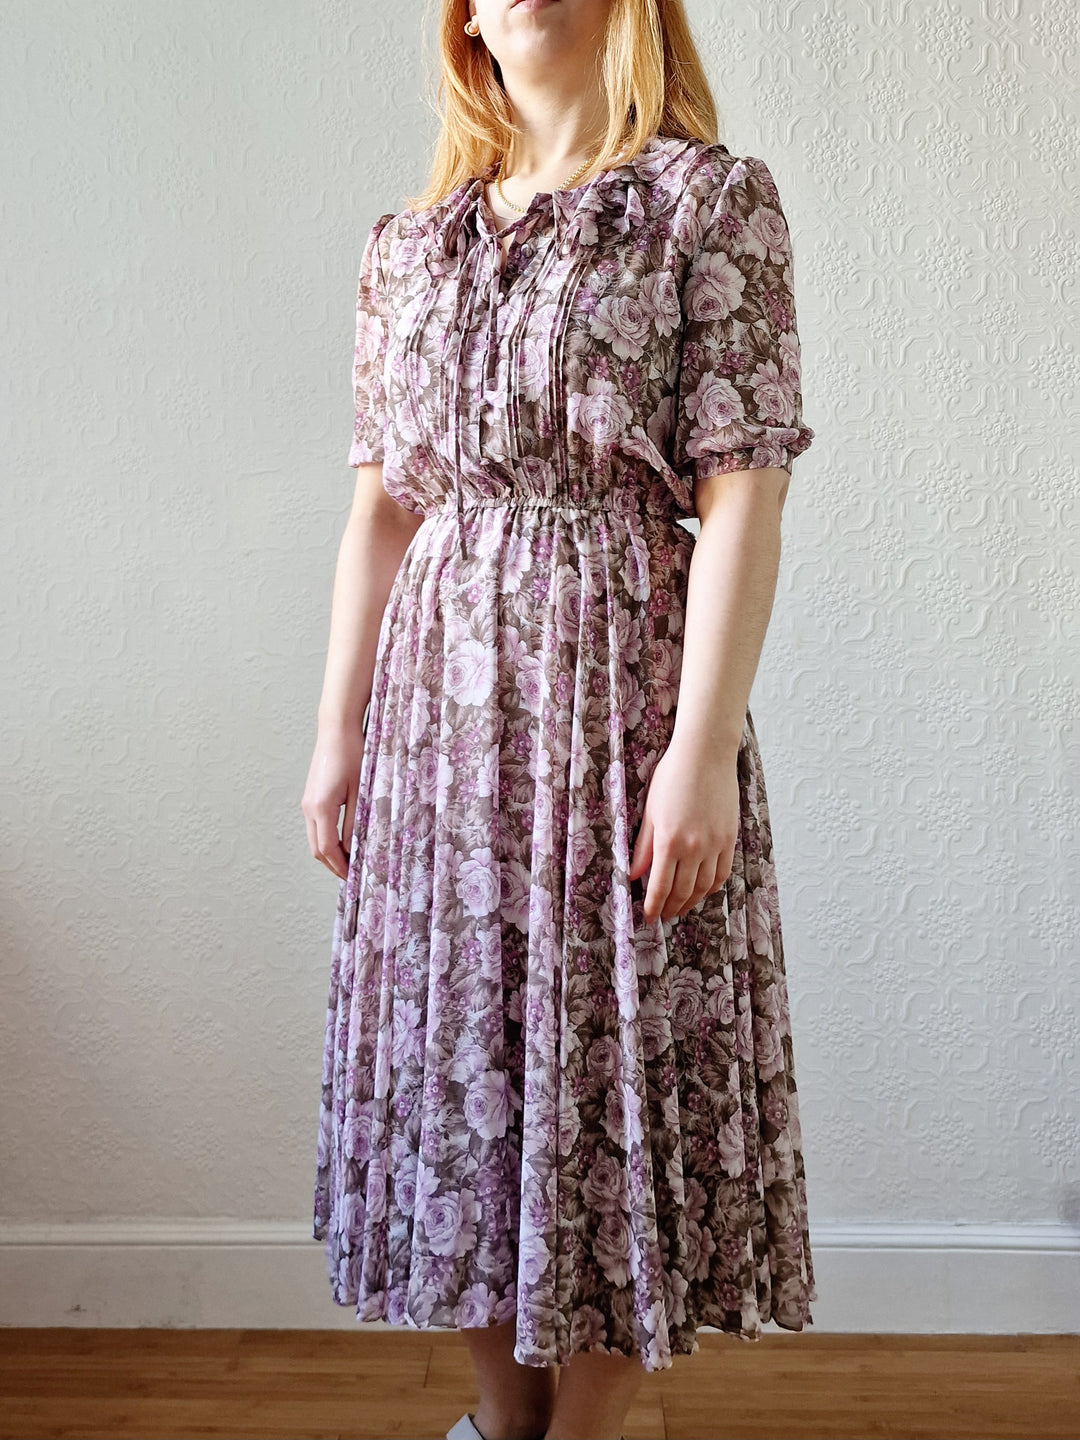 Vintage 80s Lilac Purple Romantic Floral Midi Dress with Puff Sleeves - S